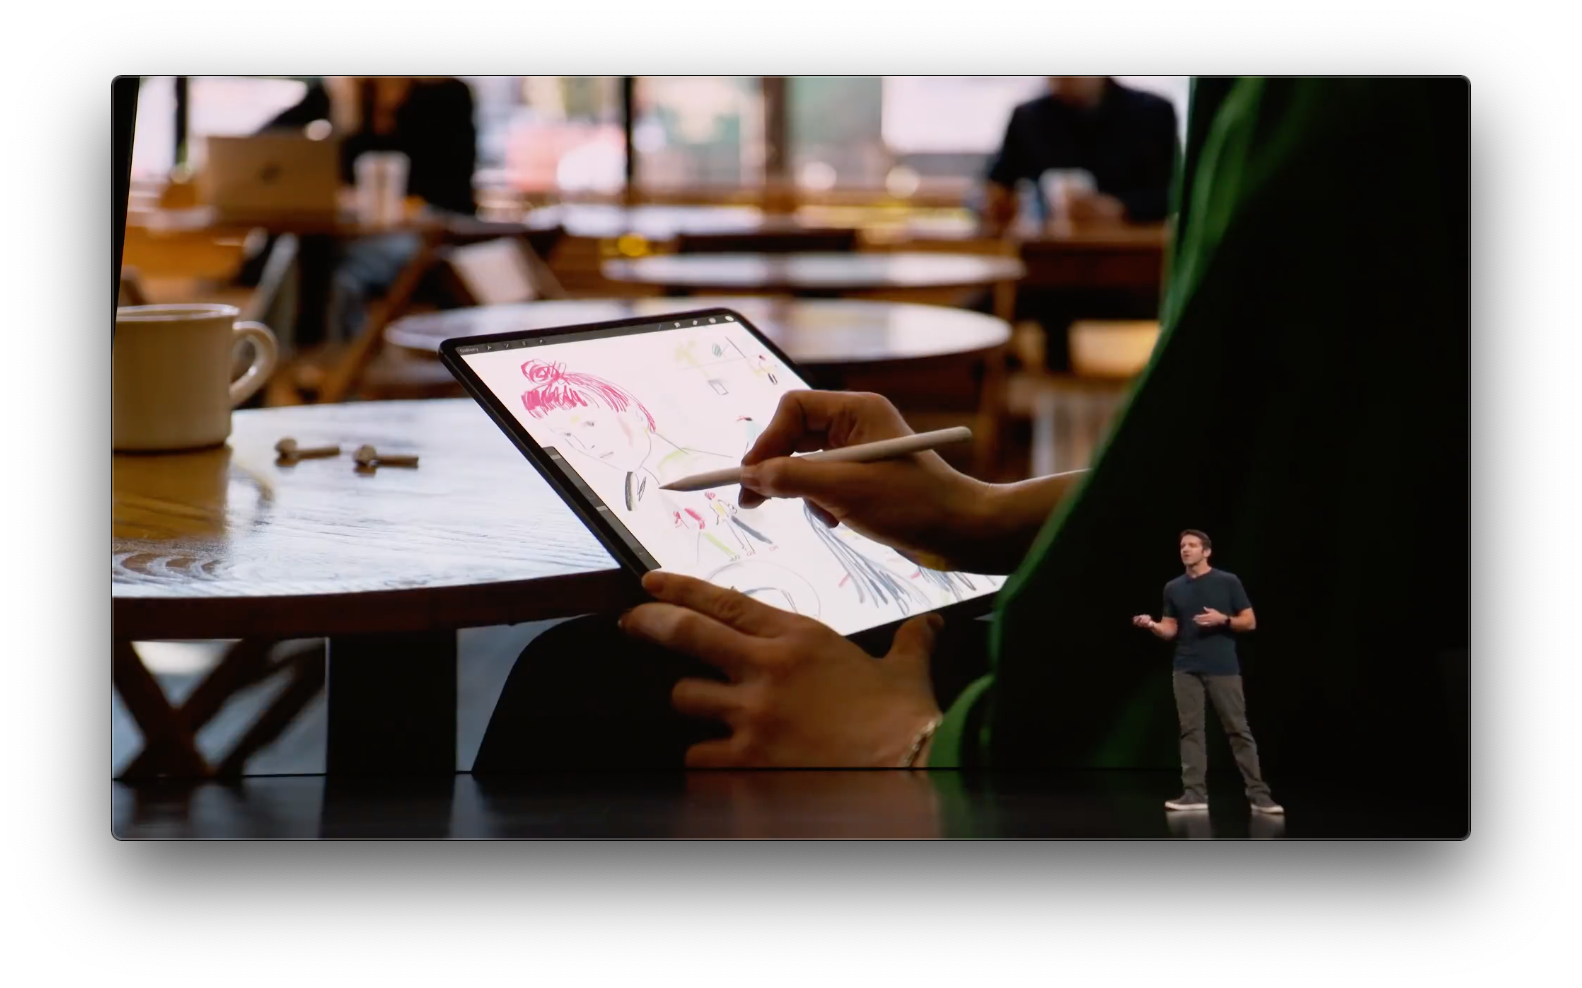 Today, the iPad Pro emphasizes creativity and there are multiple input options.